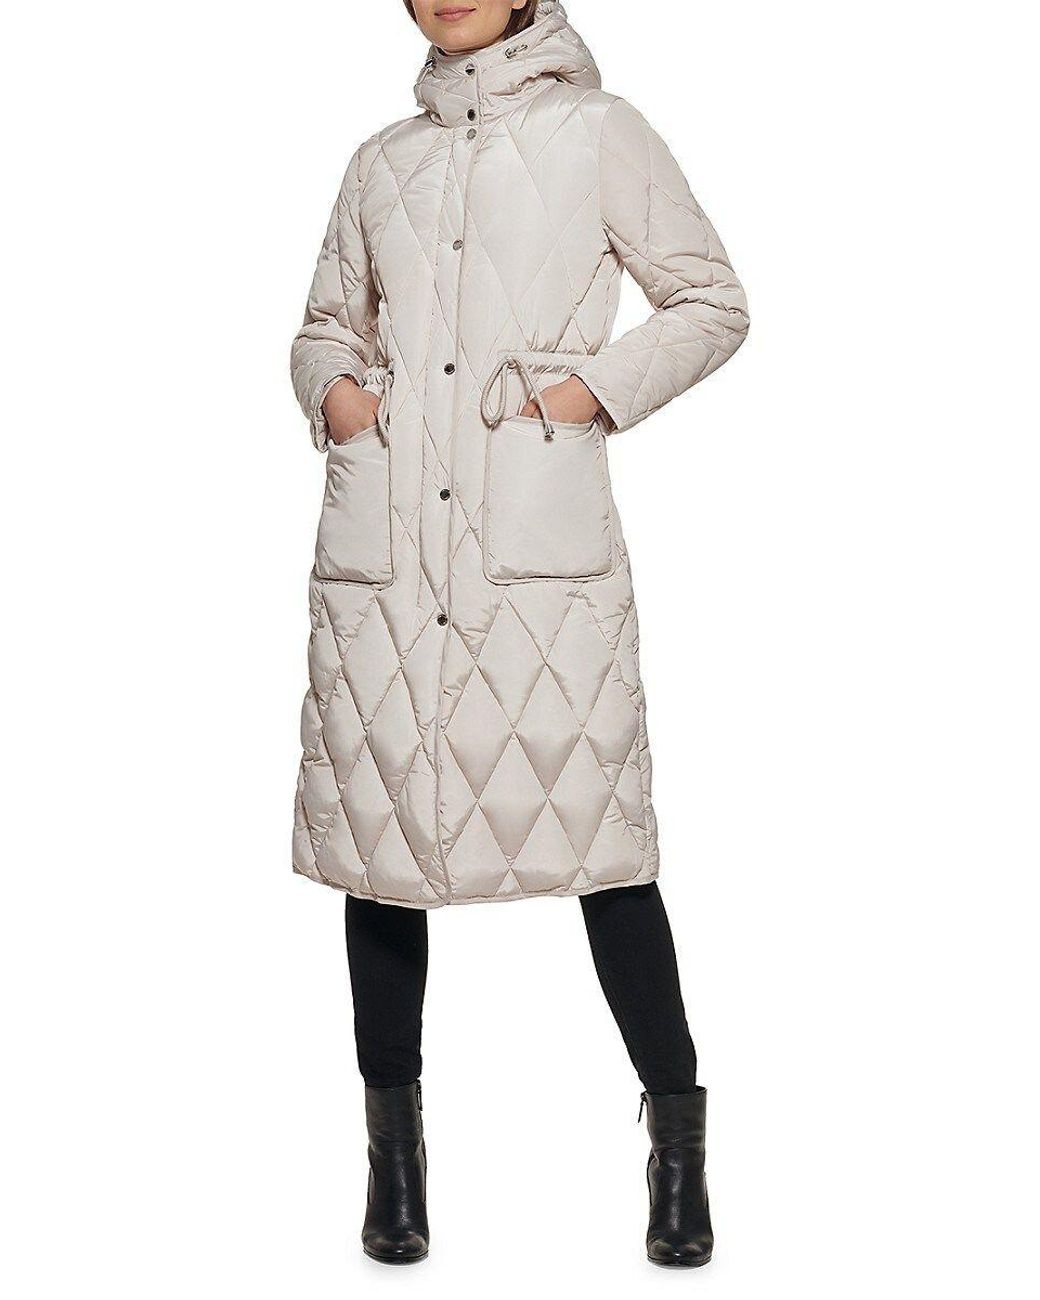 Kenneth Cole Quilted Puffer Stadium Jacket in Natural | Lyst